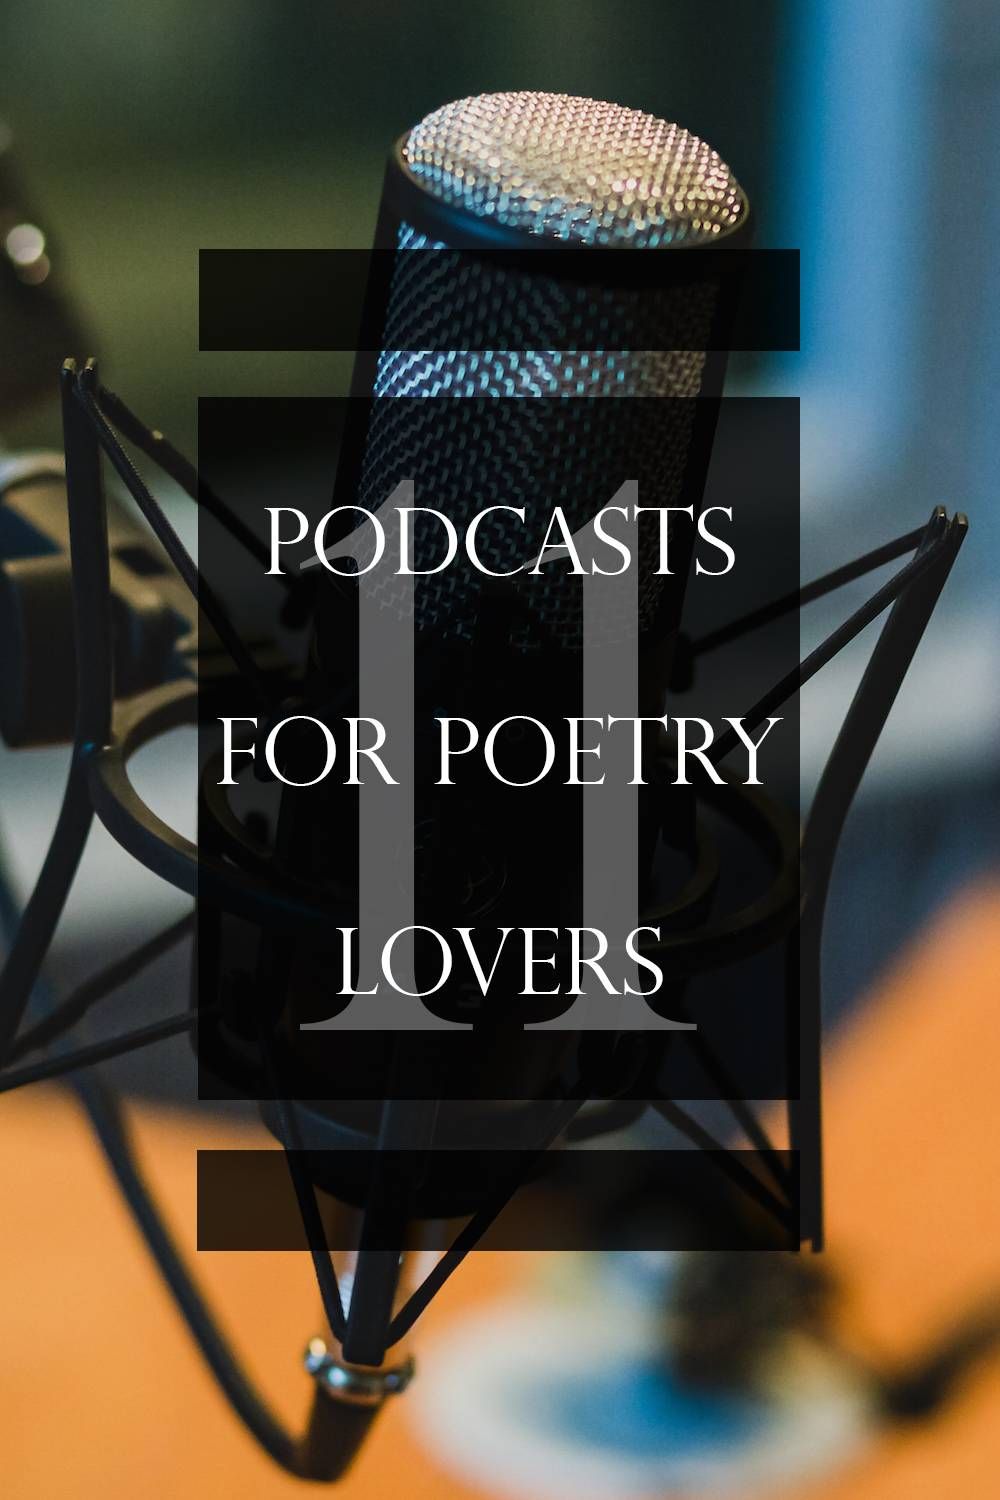 11 Podcasts for Poetry Lovers